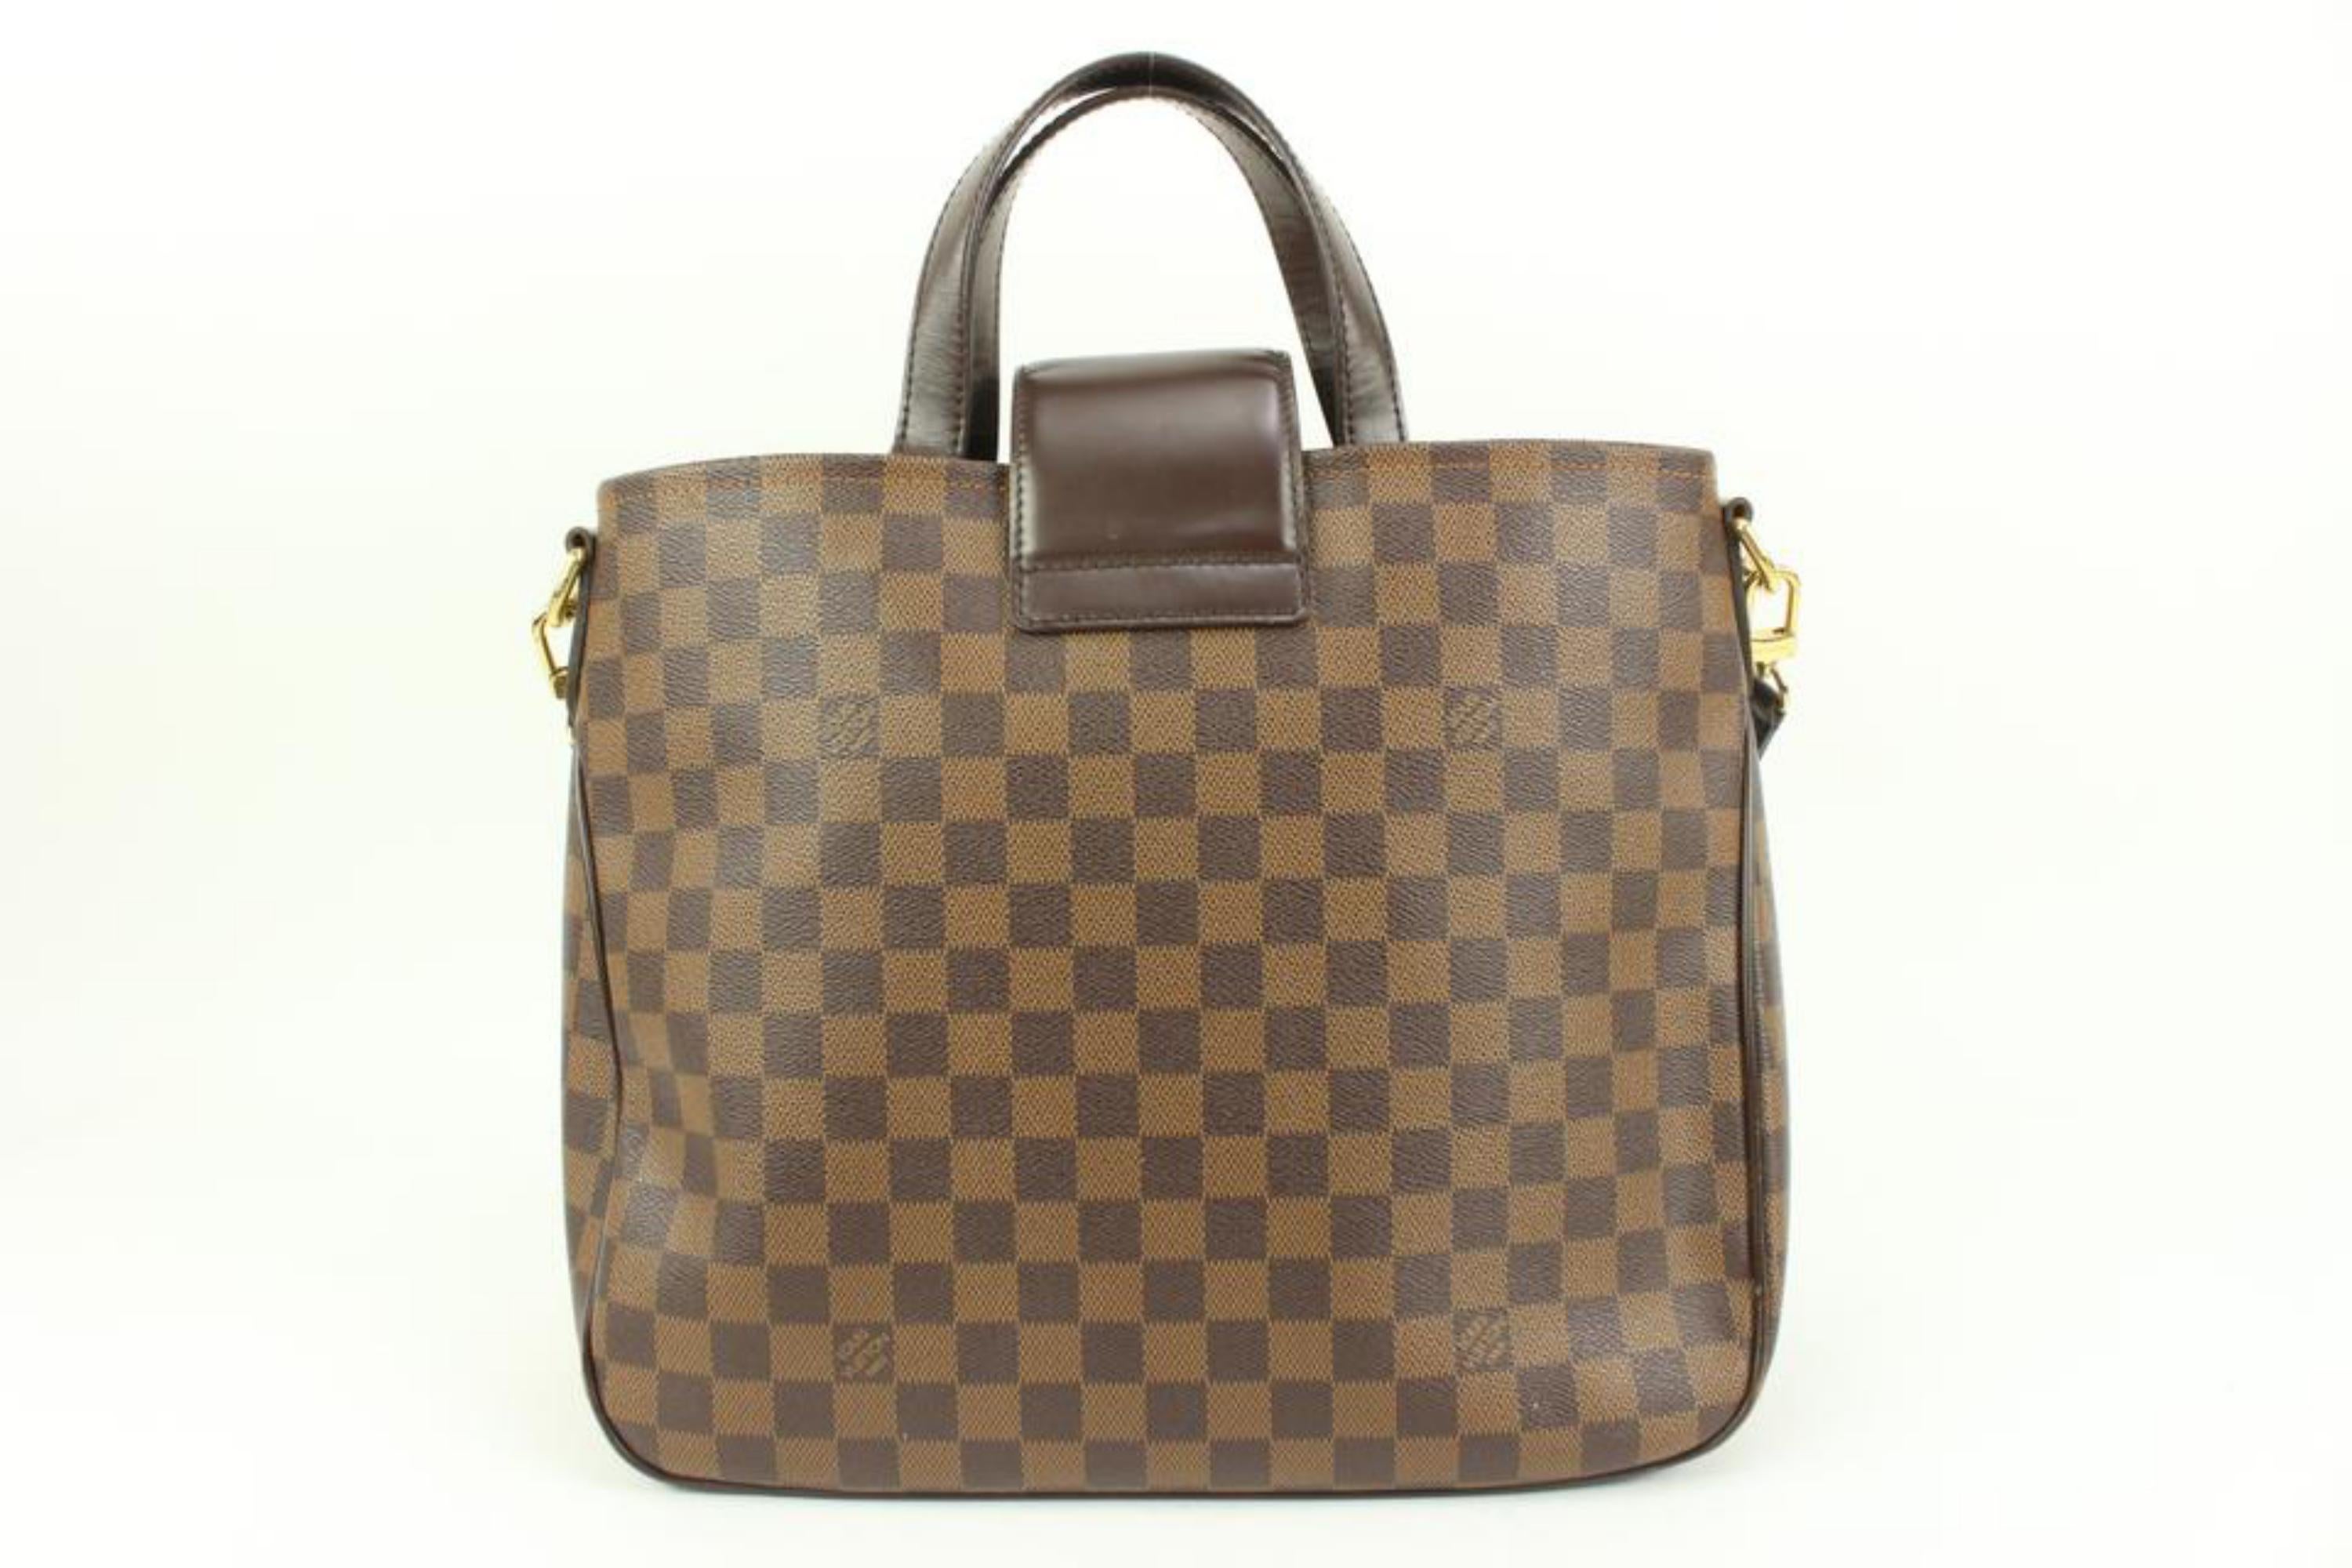 Louis Vuitton Damier Ebene Rosebery 2way Crossbody Tote Bag 41lk81 In Good Condition For Sale In Dix hills, NY